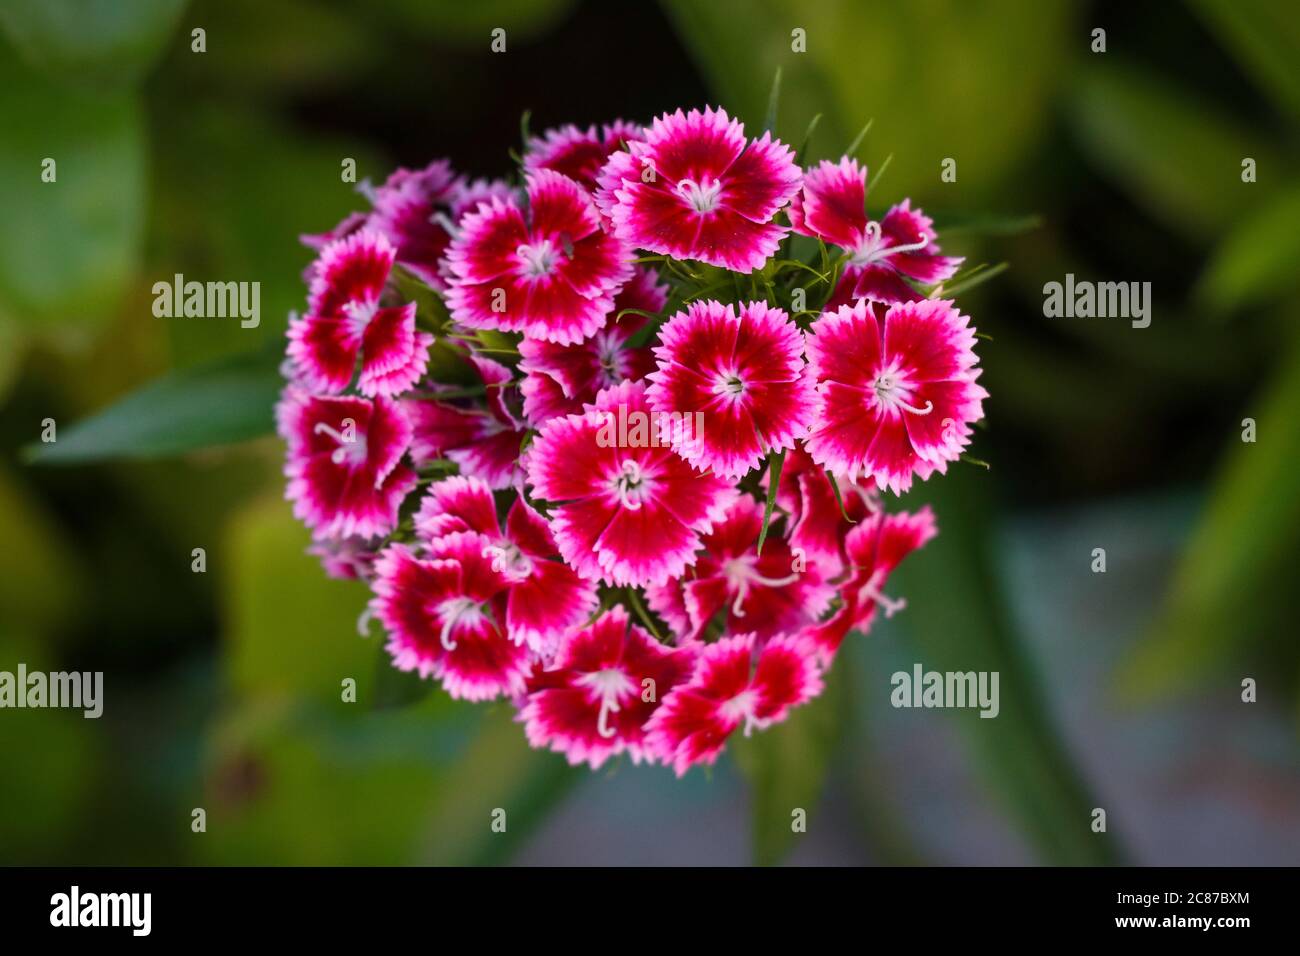 Dianthus barbatus, sweet william flower plant blooming over green blurry background Stock Photo